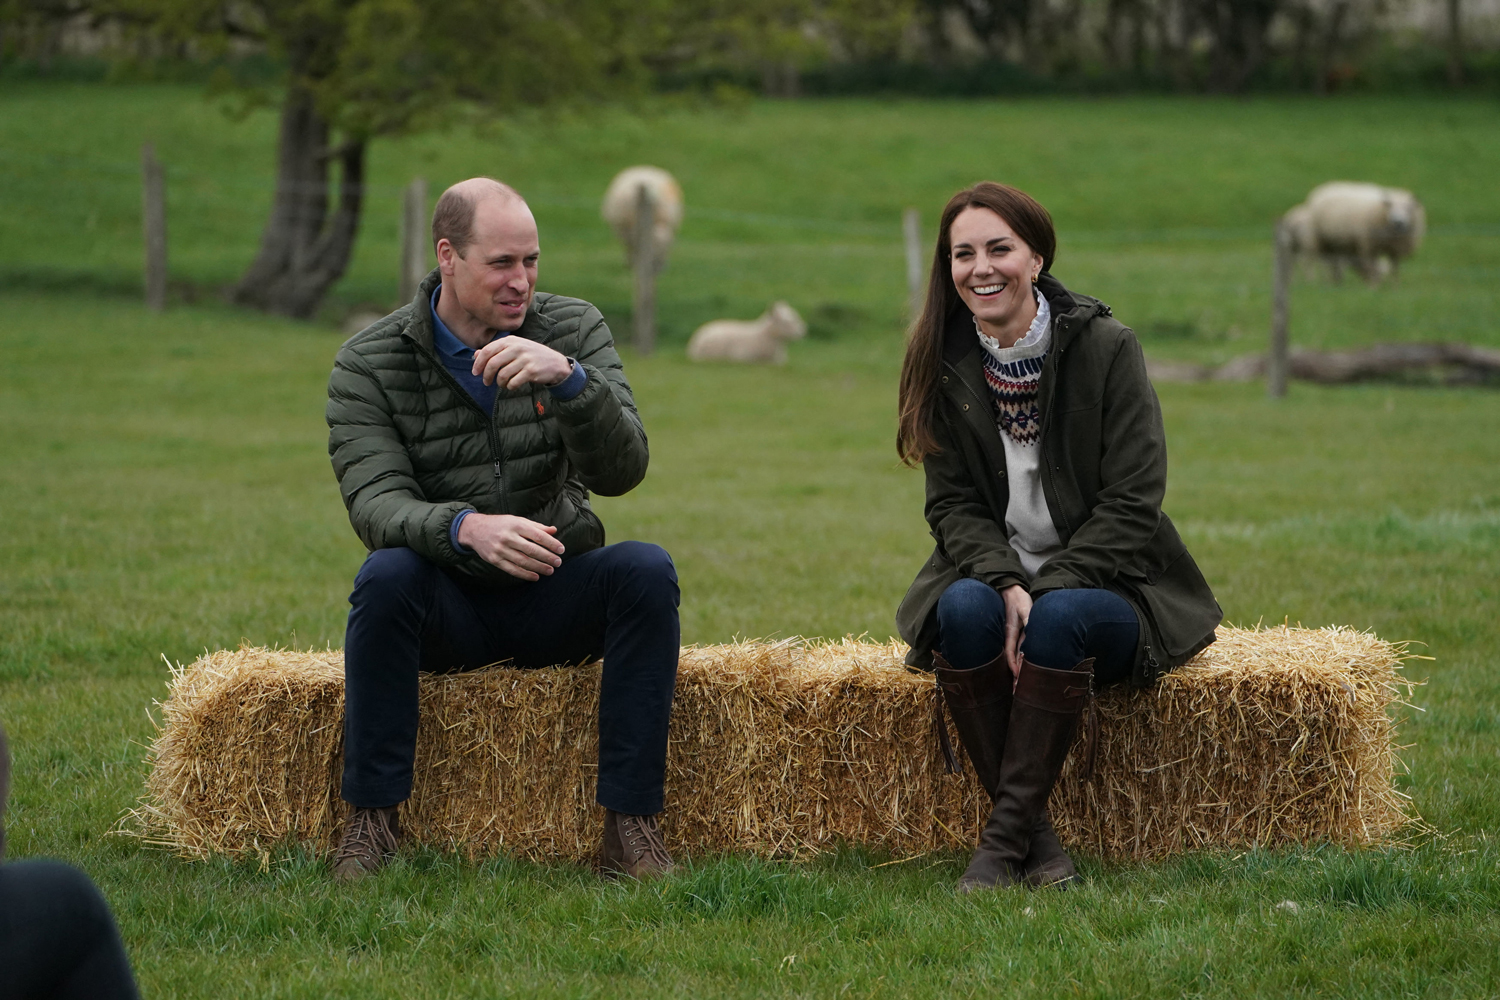 Prince William And Kate Middleton Have Taken Their Children For A Special Day Out